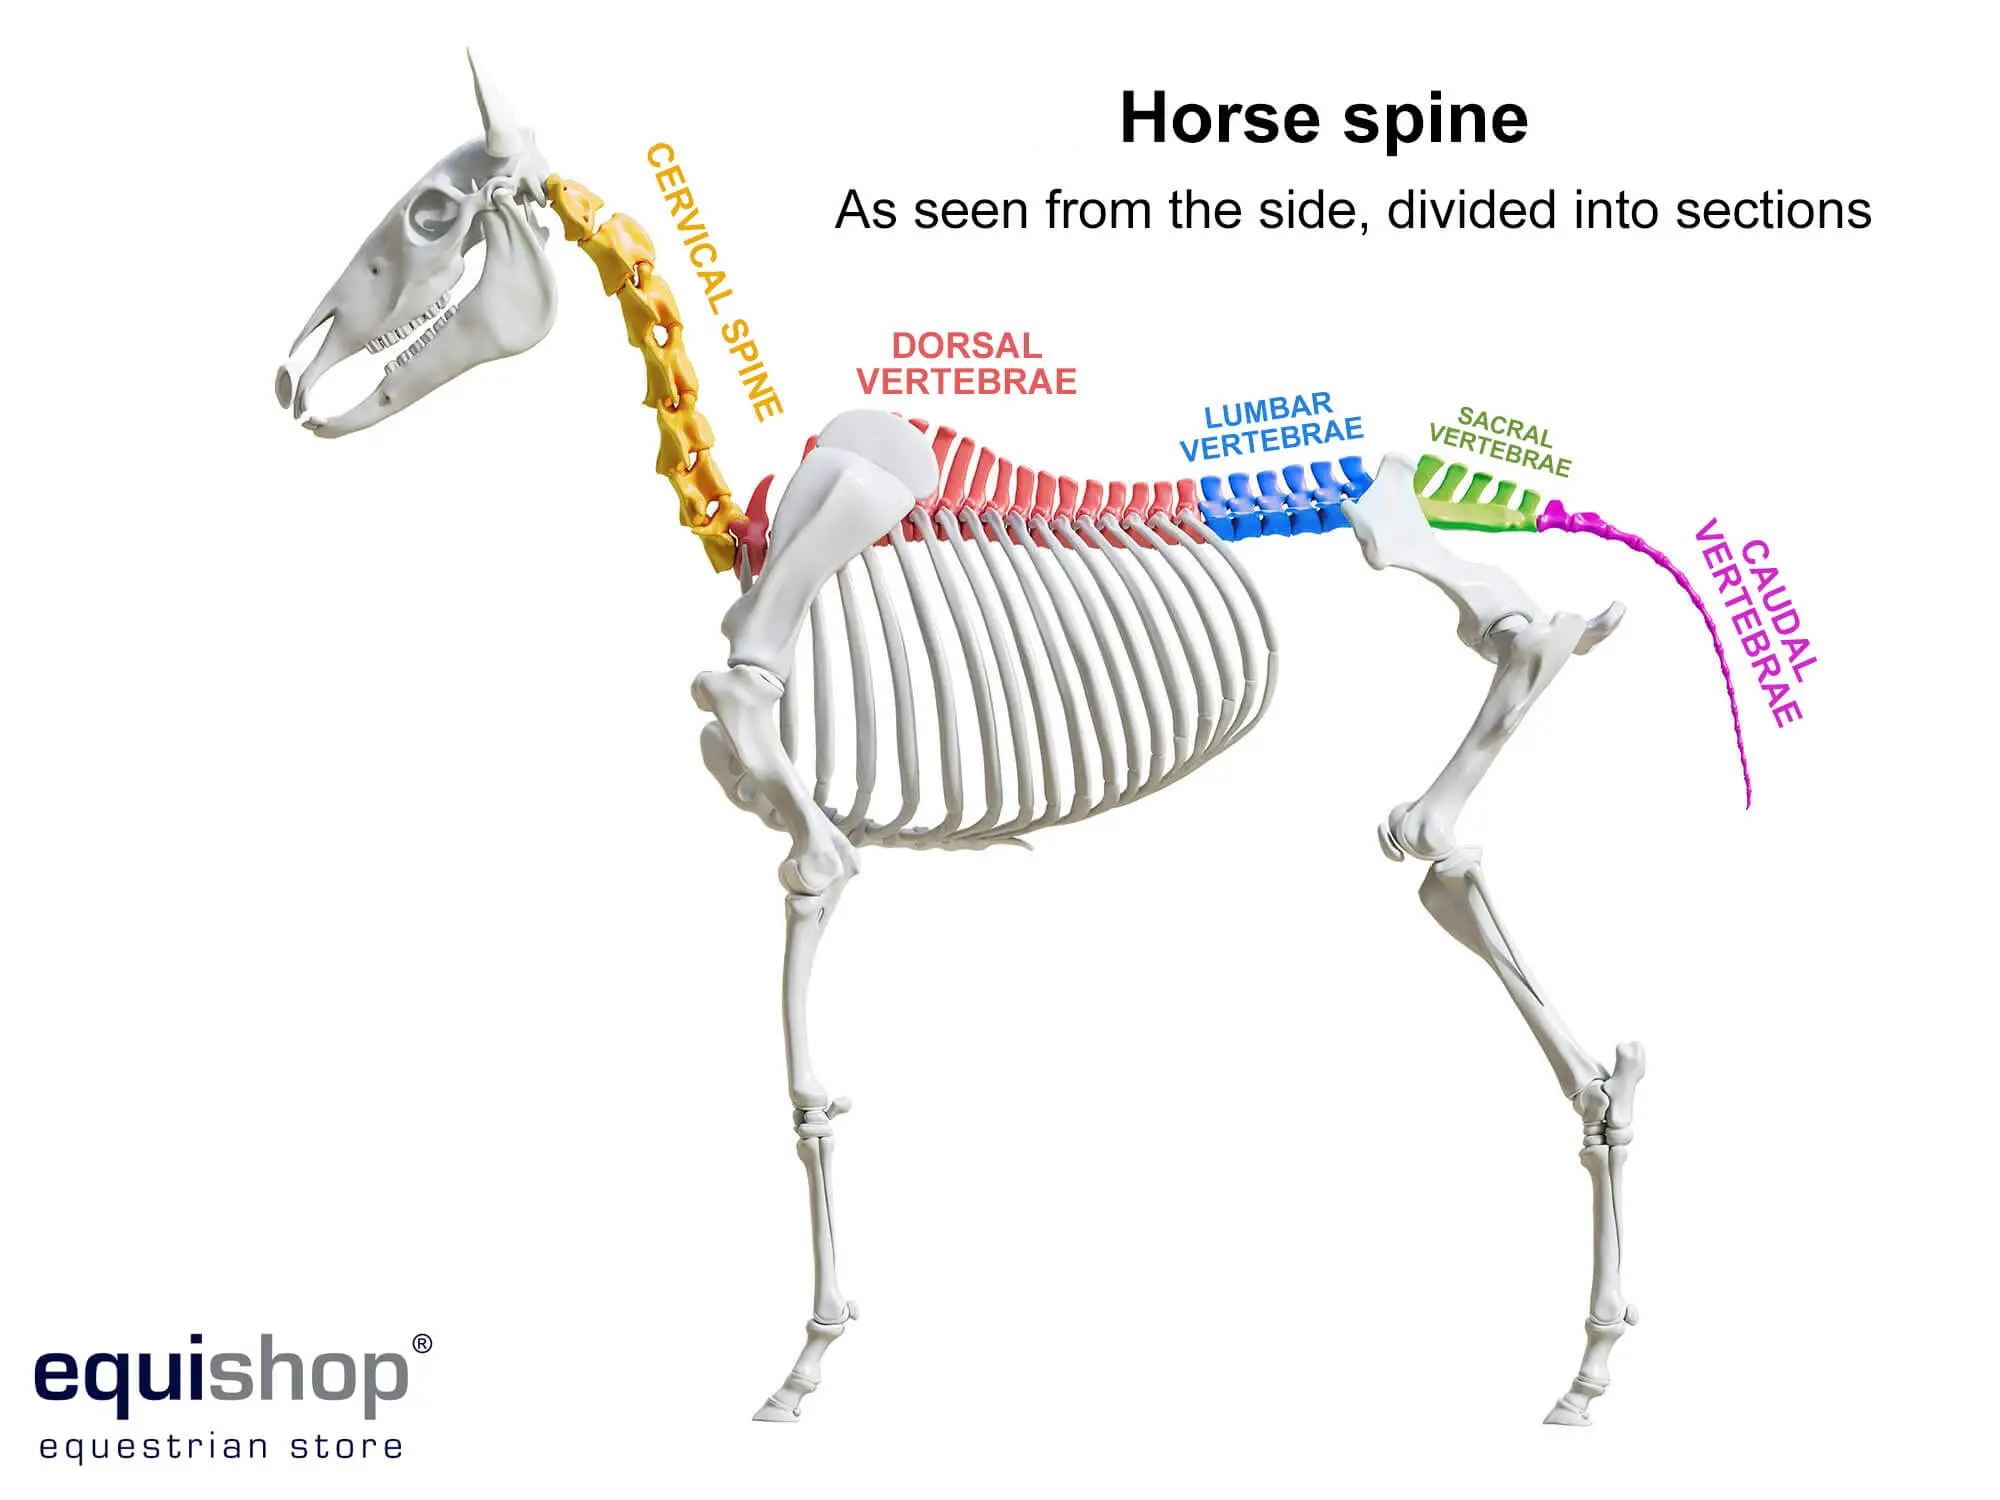 Unraveling the Mystery: How Many Vertebrae Does a Horse Have?